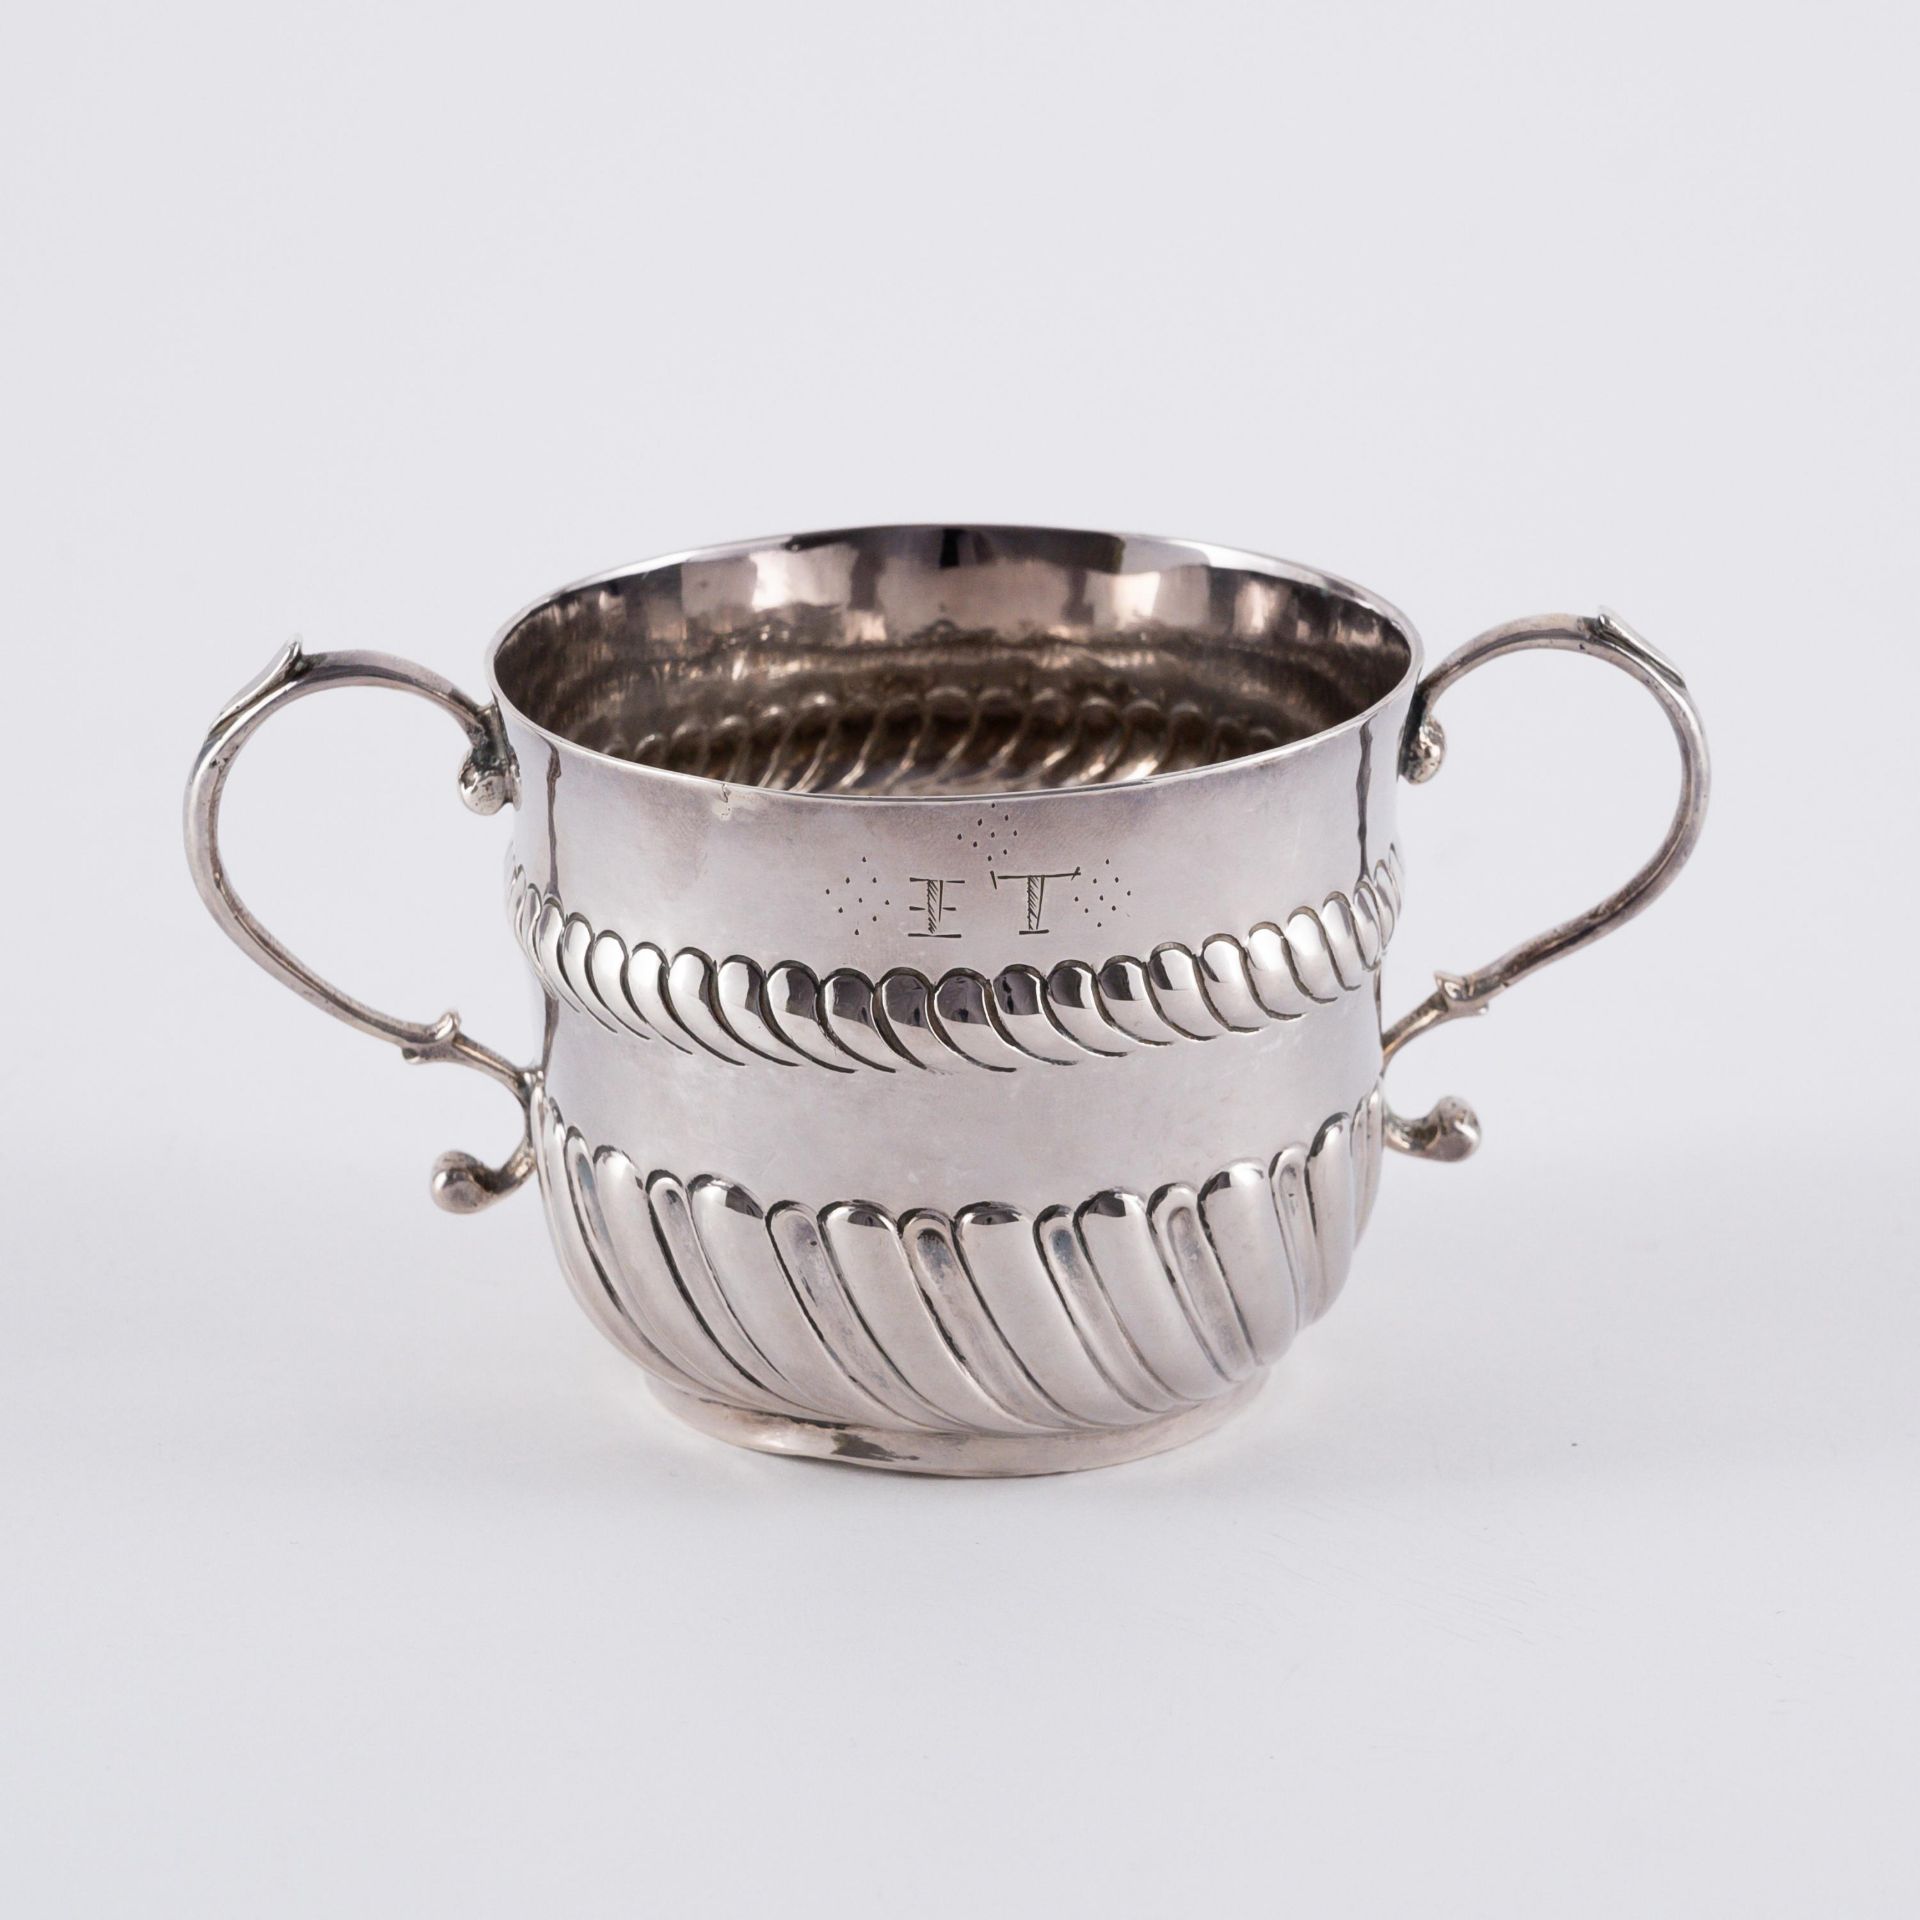 London: SILVER WILLIAM & MARY MUG WITH DOUBLE HANDLE, SO-CALLED PORRINGER - Image 3 of 6